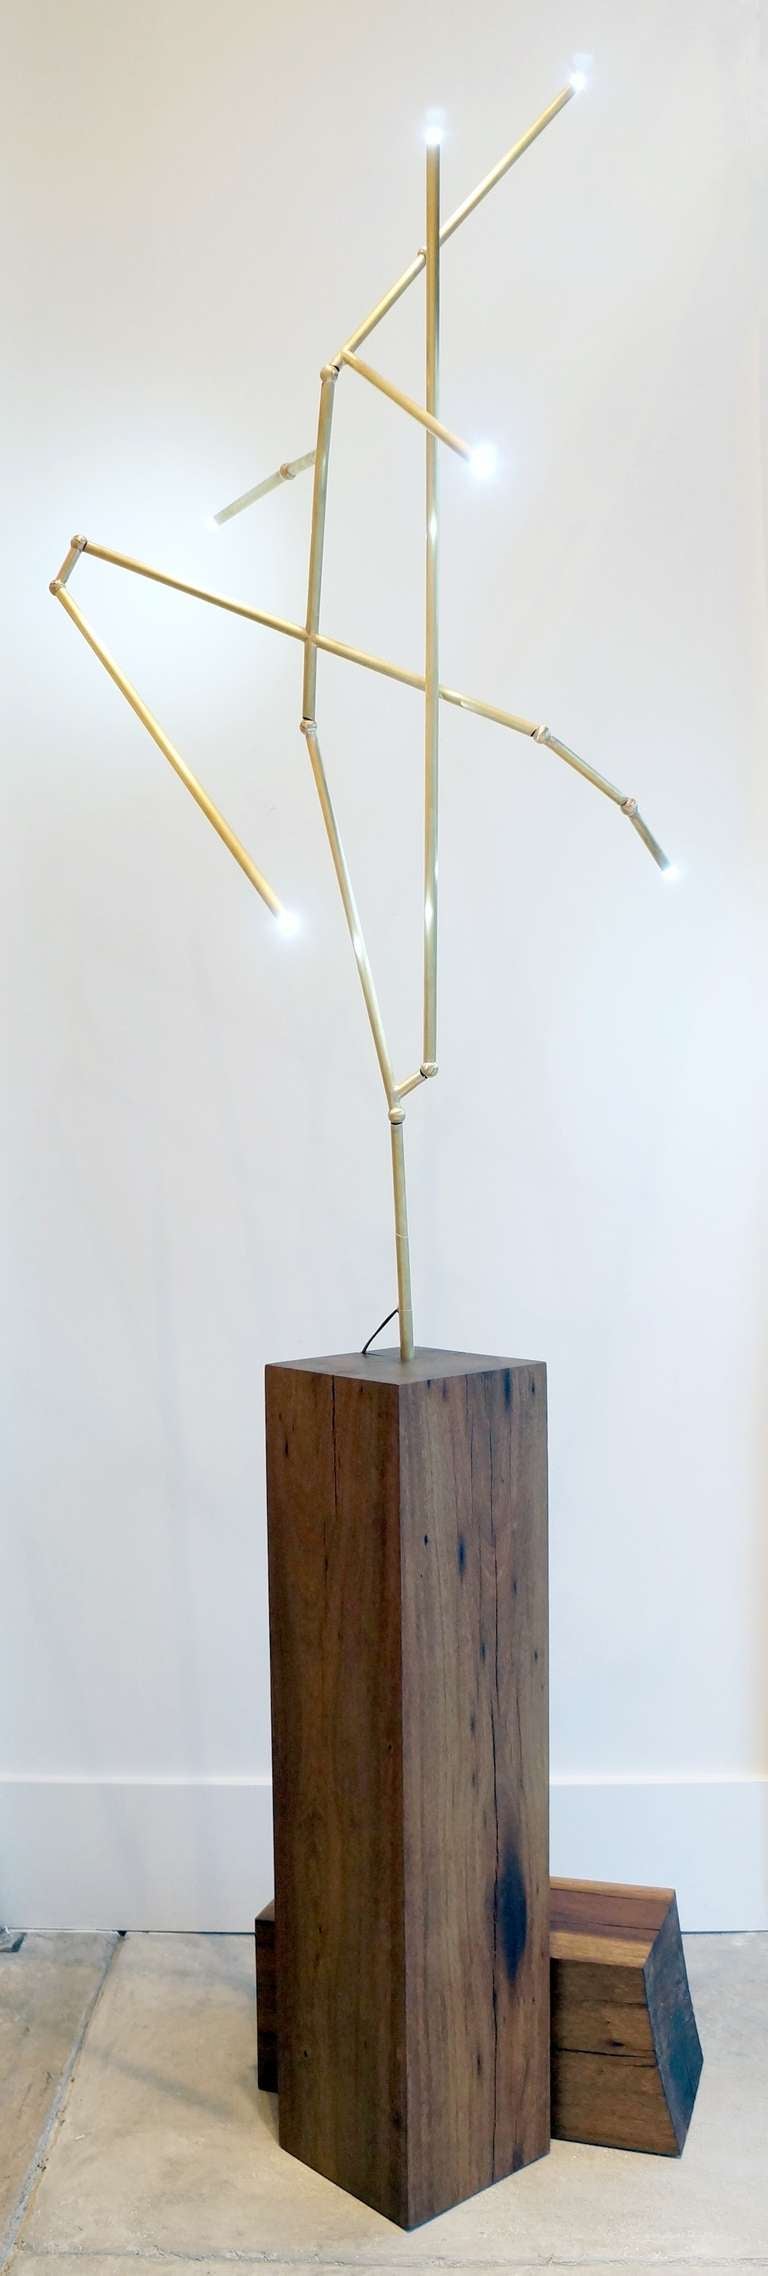 A limited edition lit sculpture by Mary Brogger.

The materials are Brazilian walnut and brass. The sculpture is made of half inch brass tubing, brass ball joints, changeable and dim-able LED bulbs (dimmer not included) and a low voltage transformer